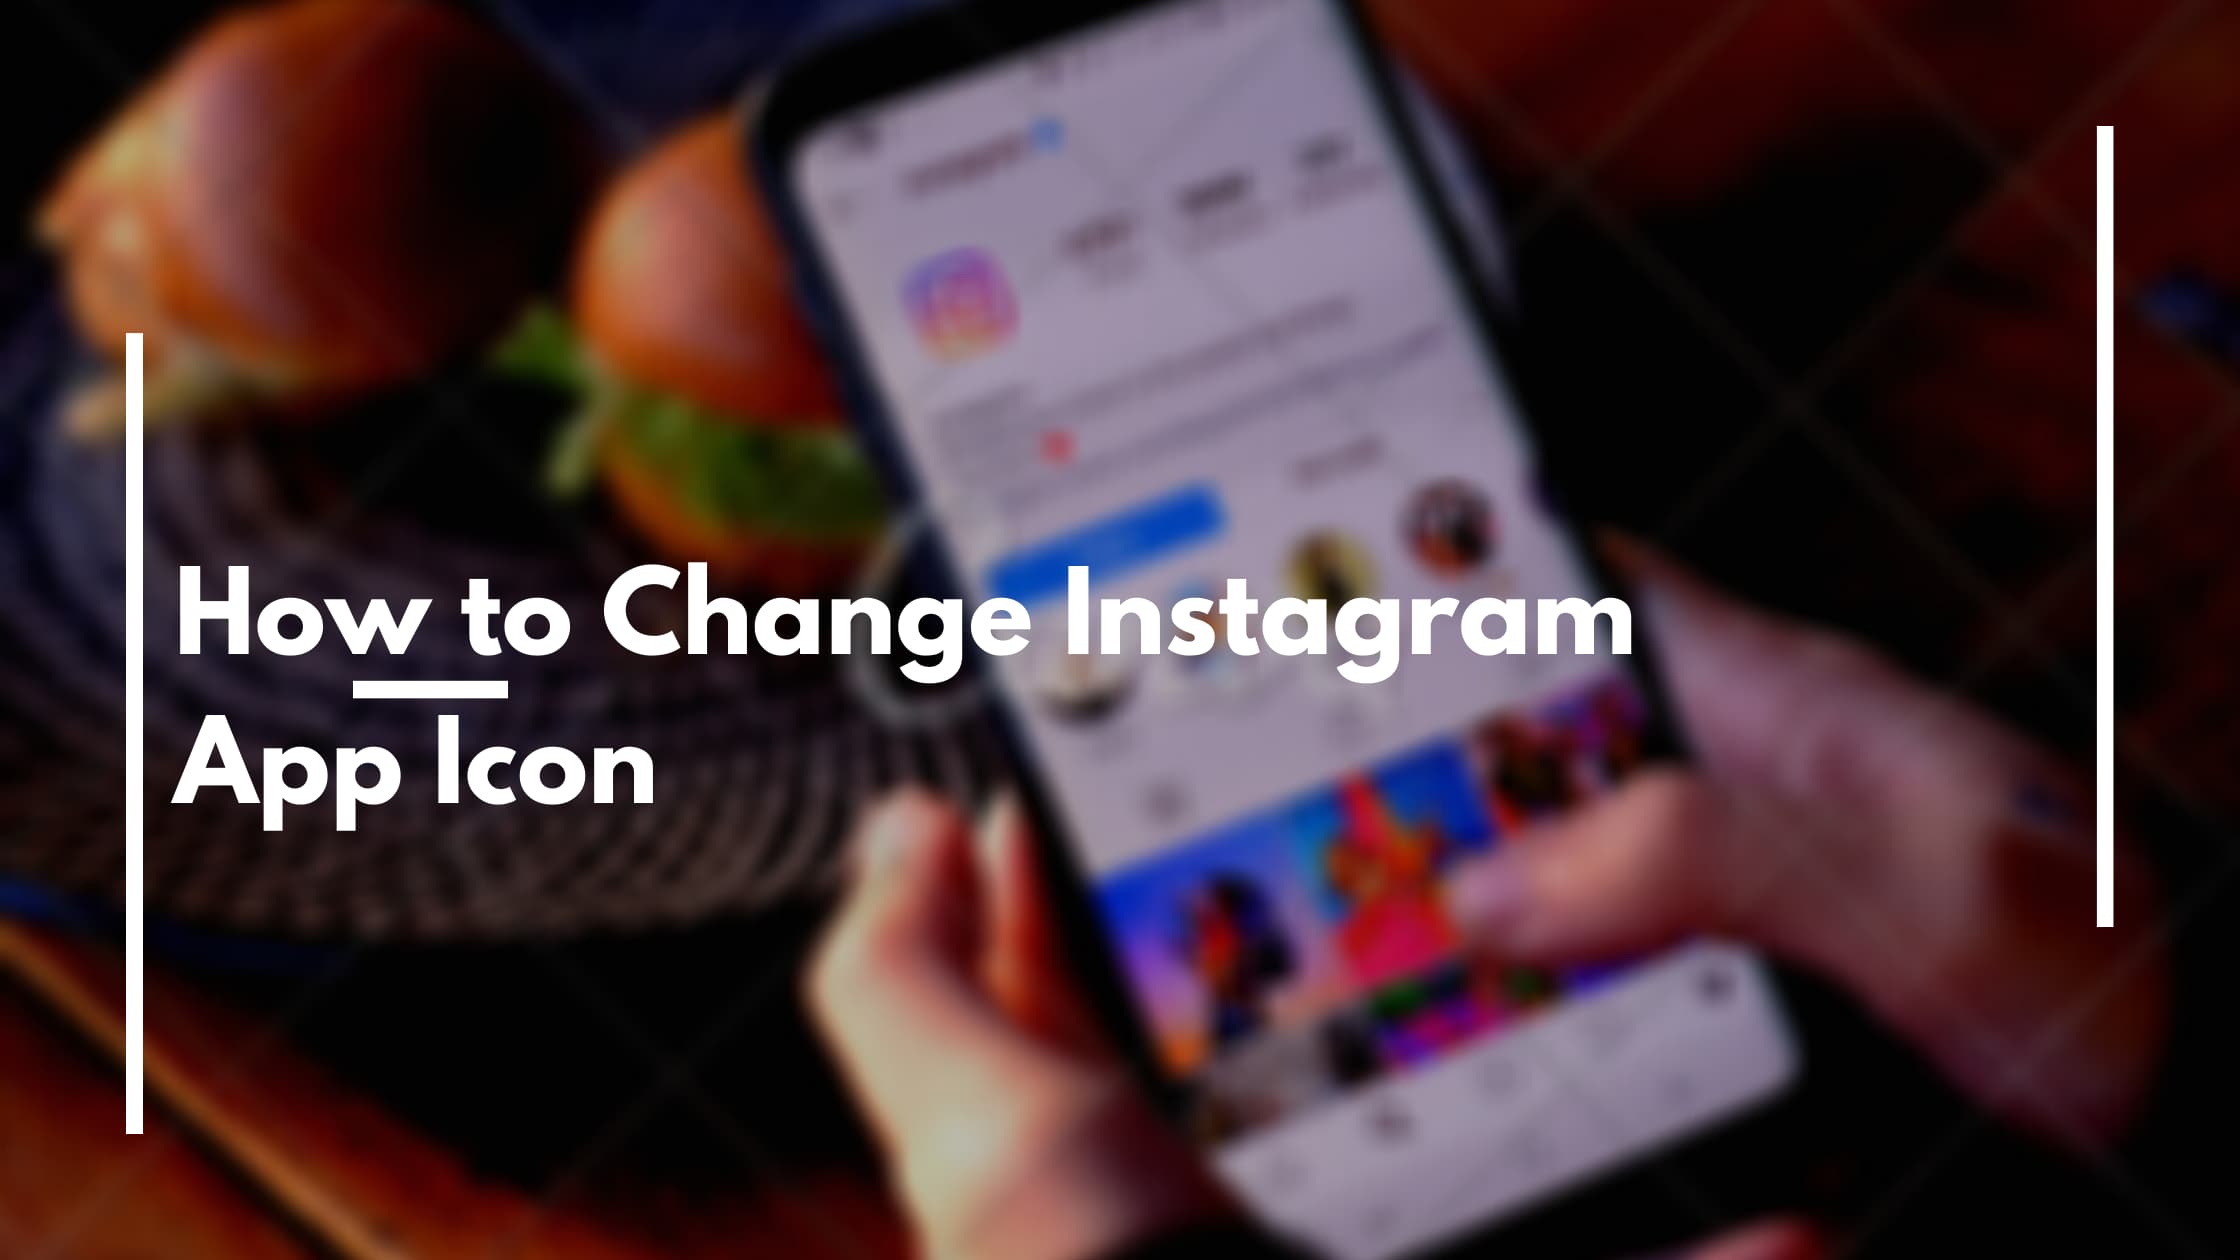 How to Change the Instagram App Icon